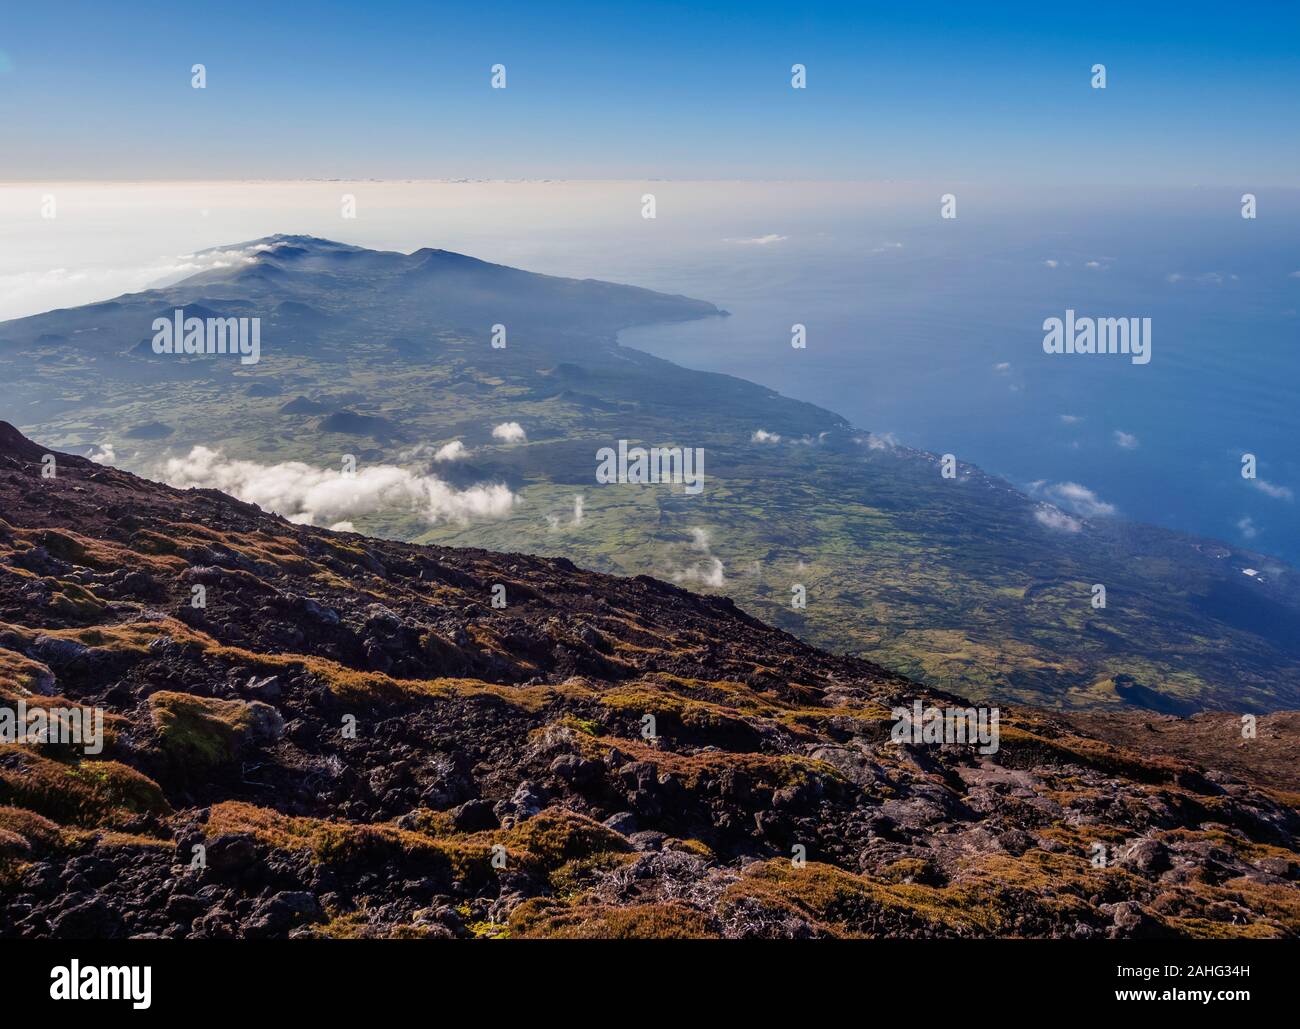 View from the Mount Pico, Pico Island, Azores, Portugal Stock Photo